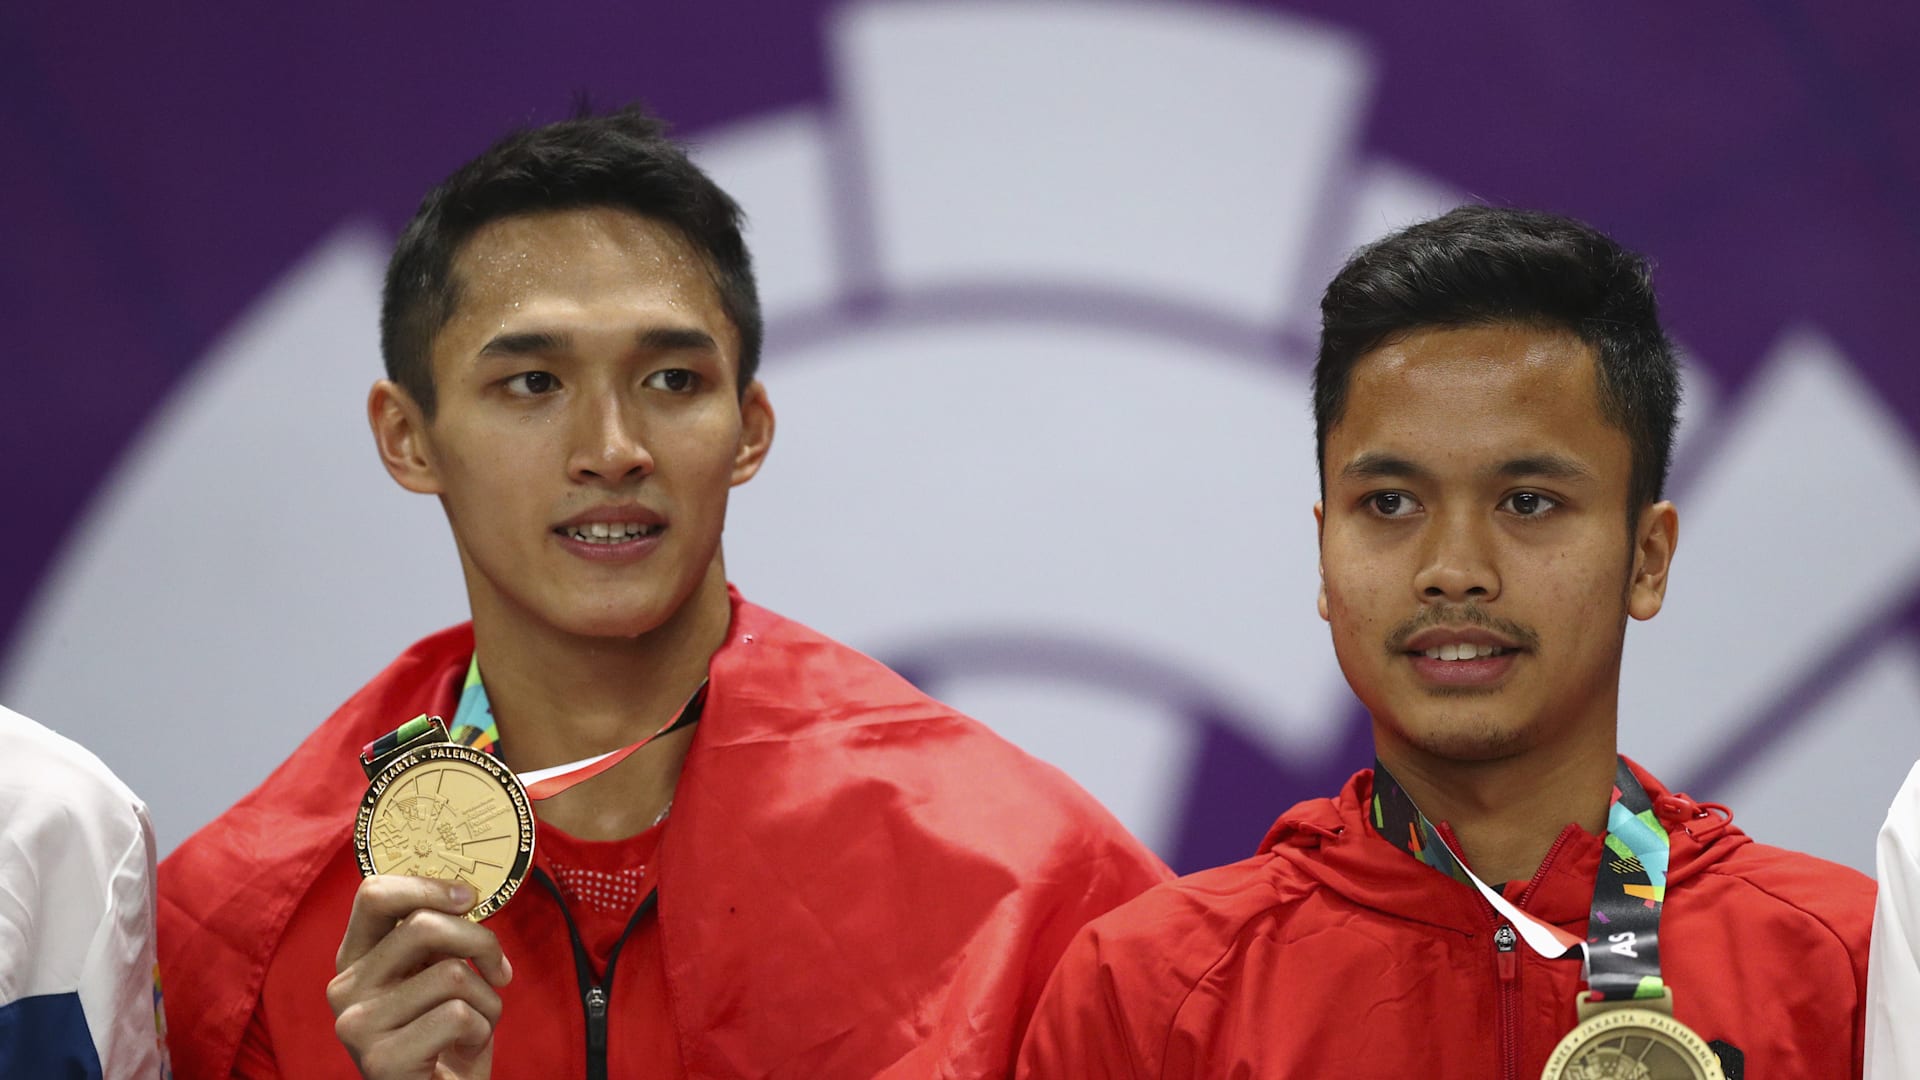 Medalists set for return to scene of 2012 Olympic glory